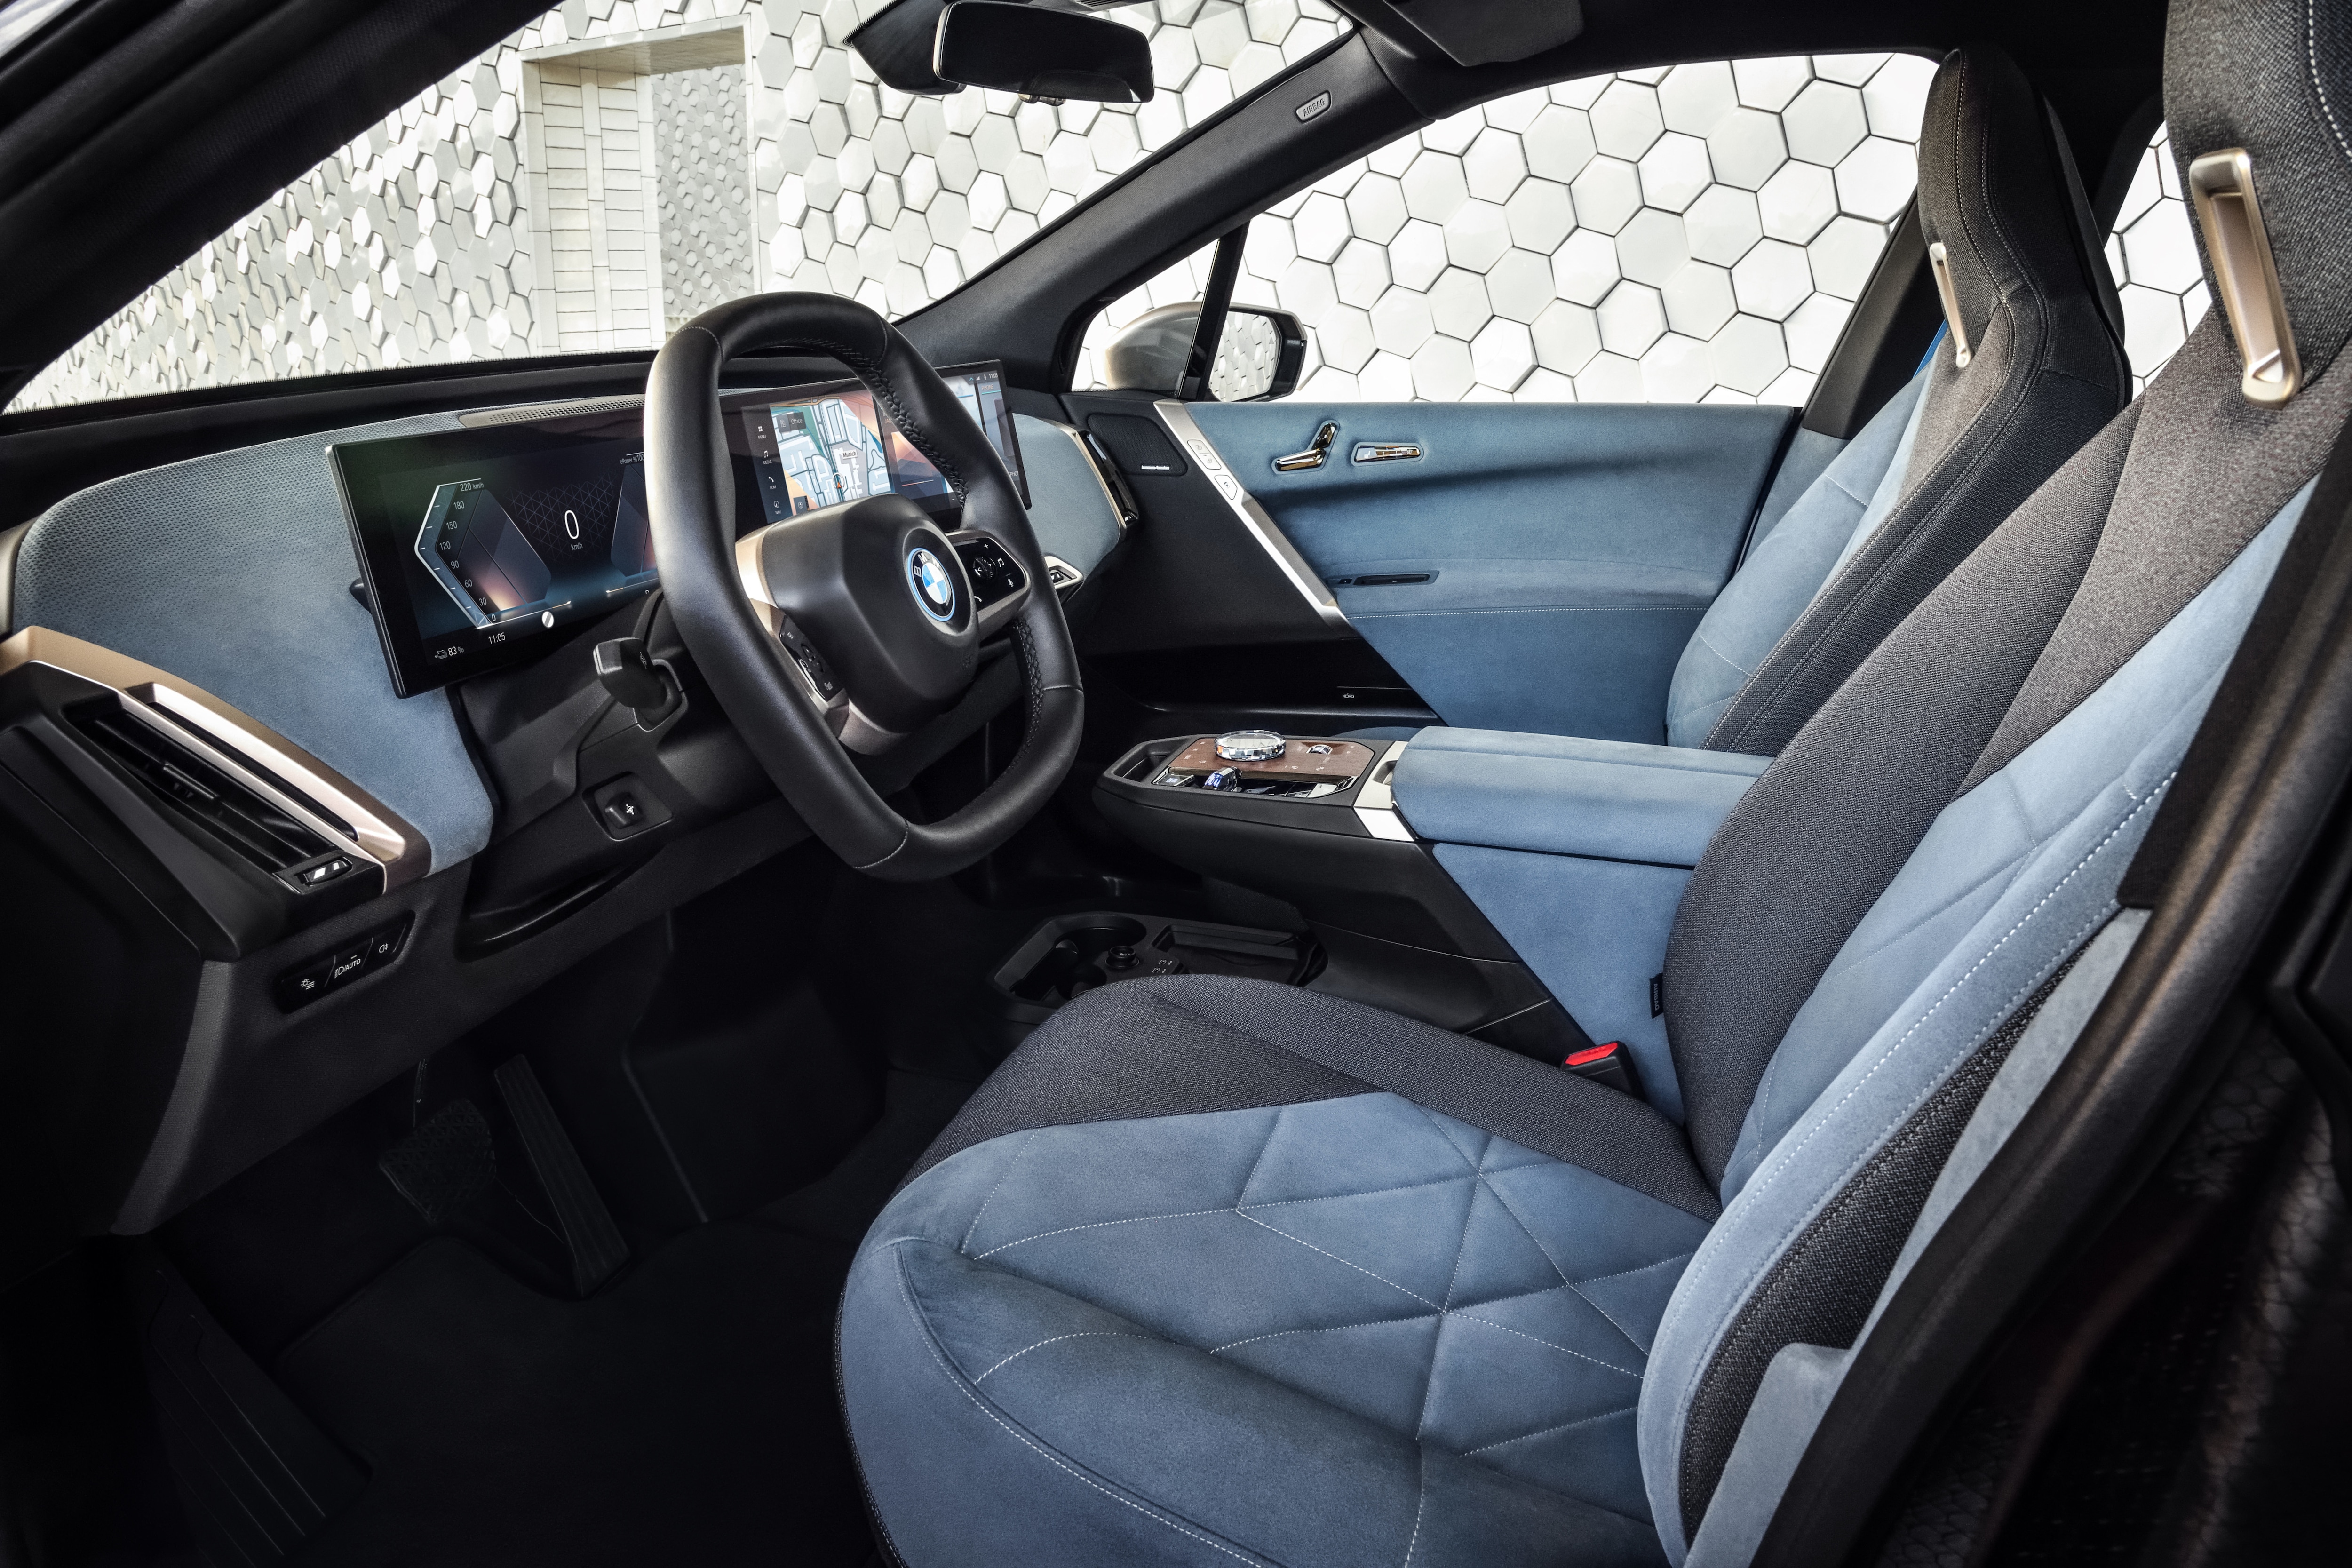 Inside the cabin, the BMW iX electric SUV will feature a dashboard with a sweeping, curved screen. 